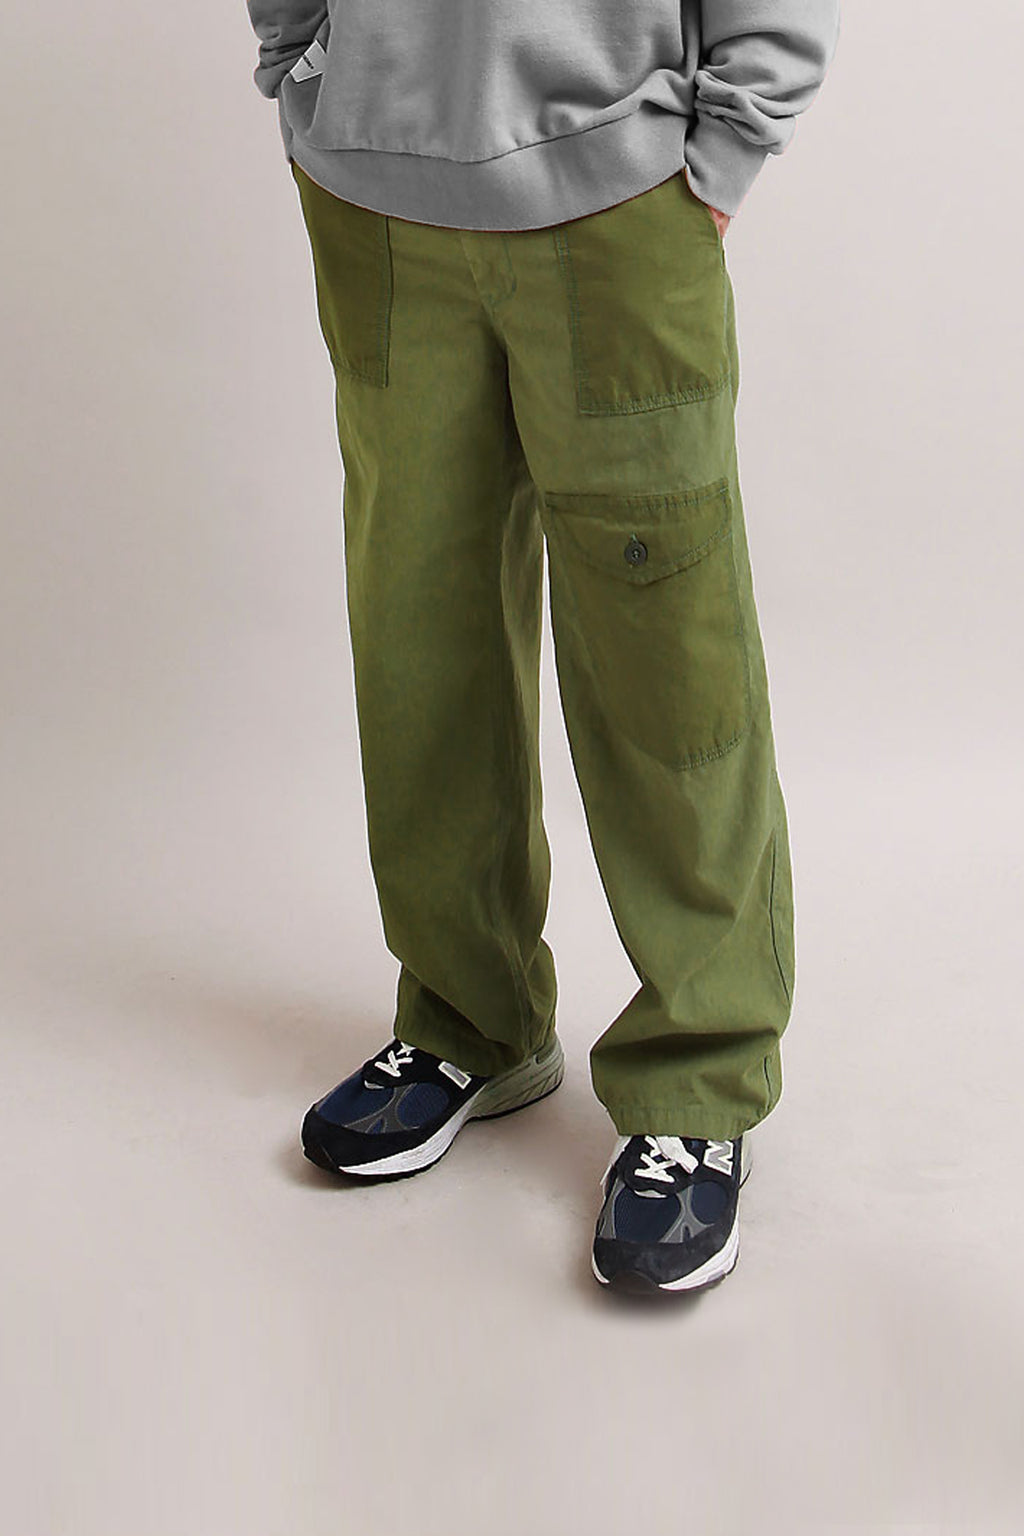 Outstanding & Co. - Fatigue Pocket Pants - Olive | Blacksmith Store